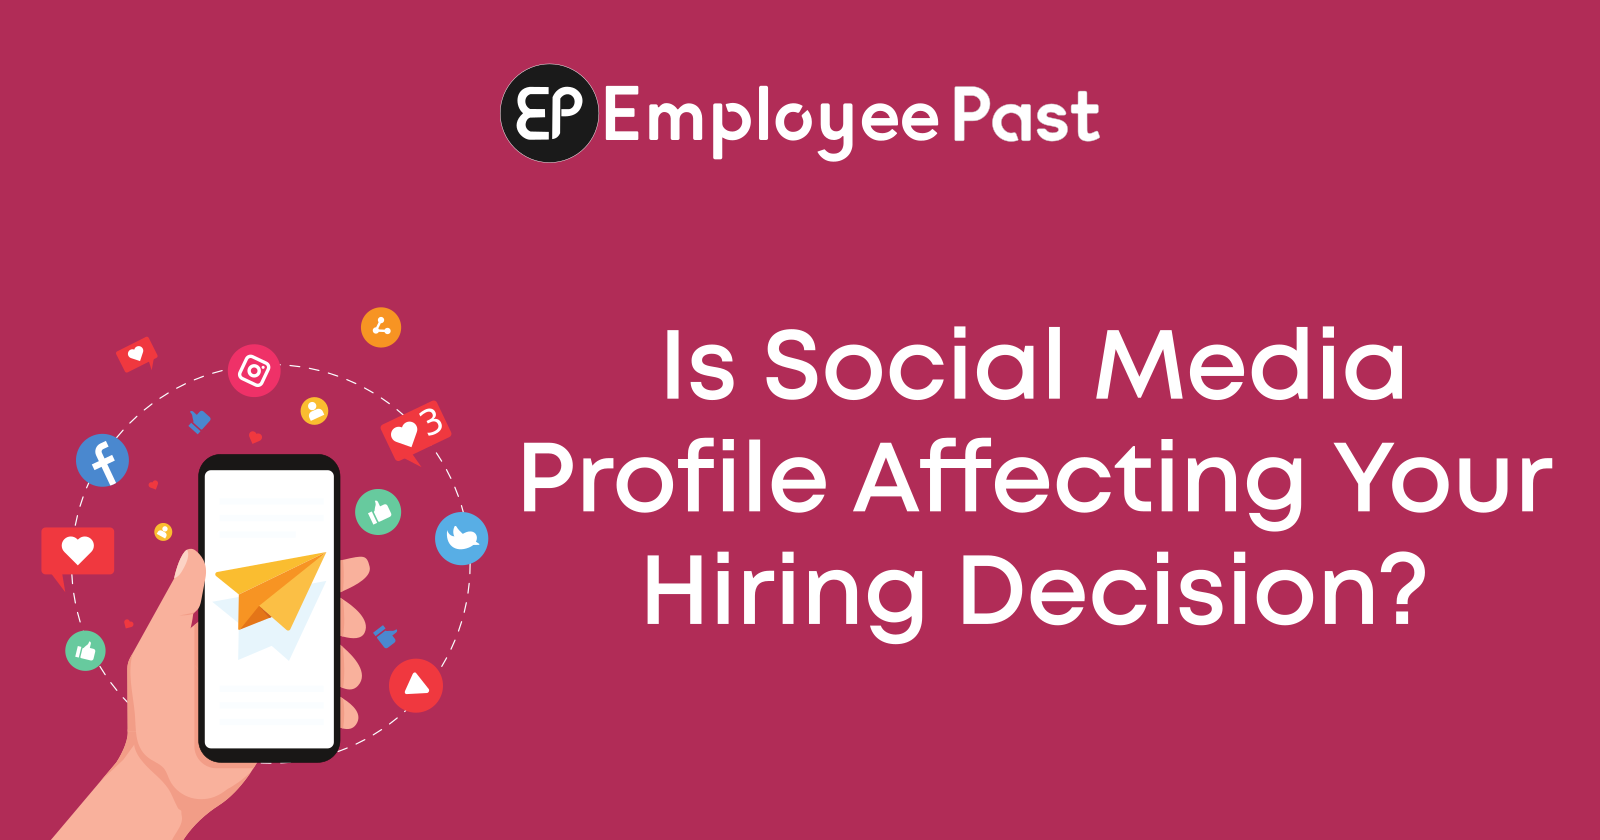 Should You Review Candidates Social Media Profiles Before Hiring?